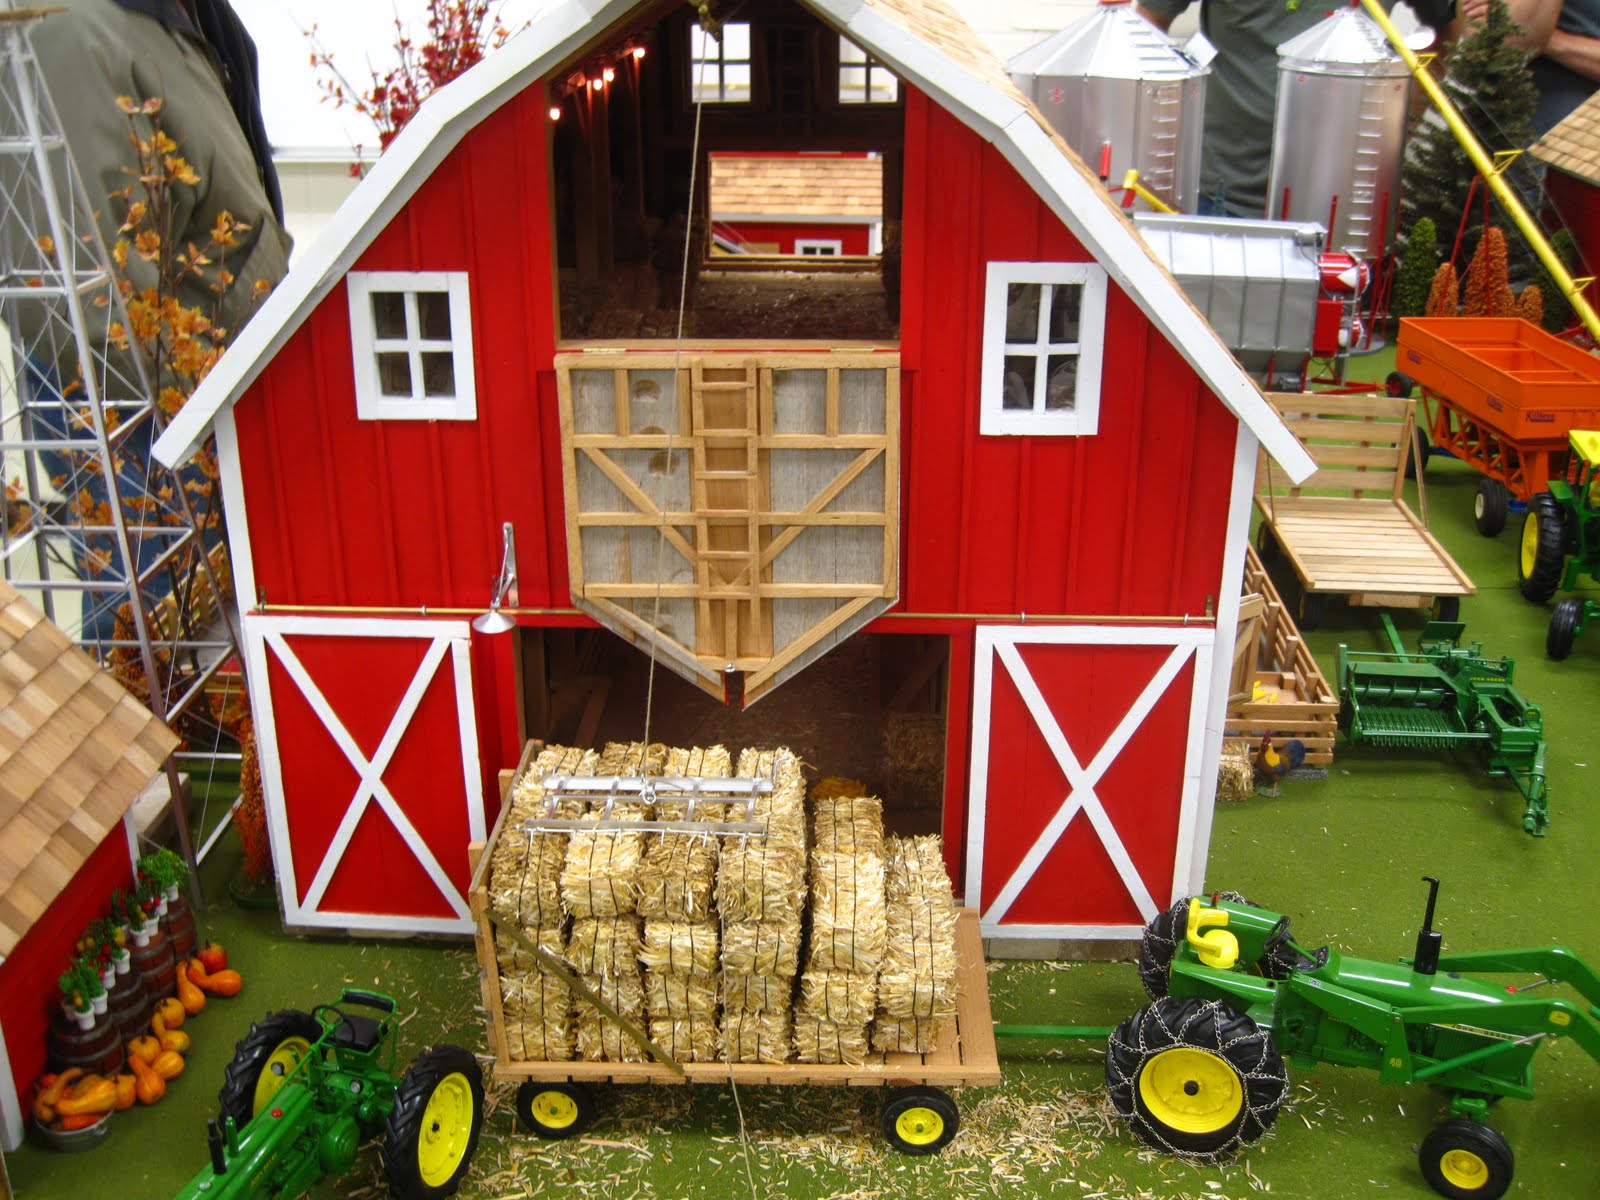 Zac's Tractors 2010 National Farm Toy Show Pictures